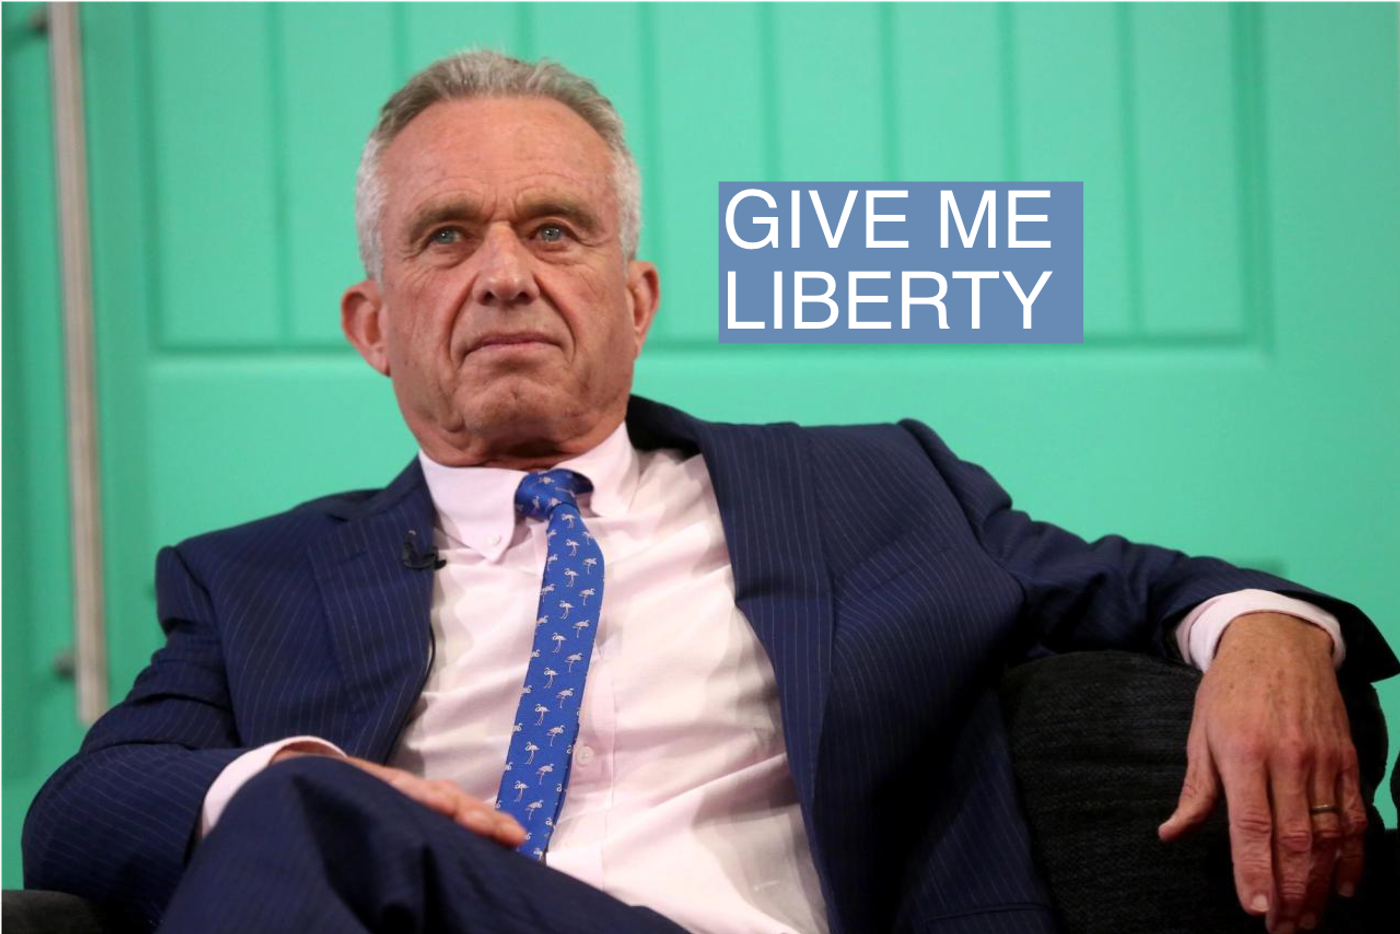 Libertarians could supercharge RFK Jr’s campaign. But can he prove he’s one of them? (semafor.com)